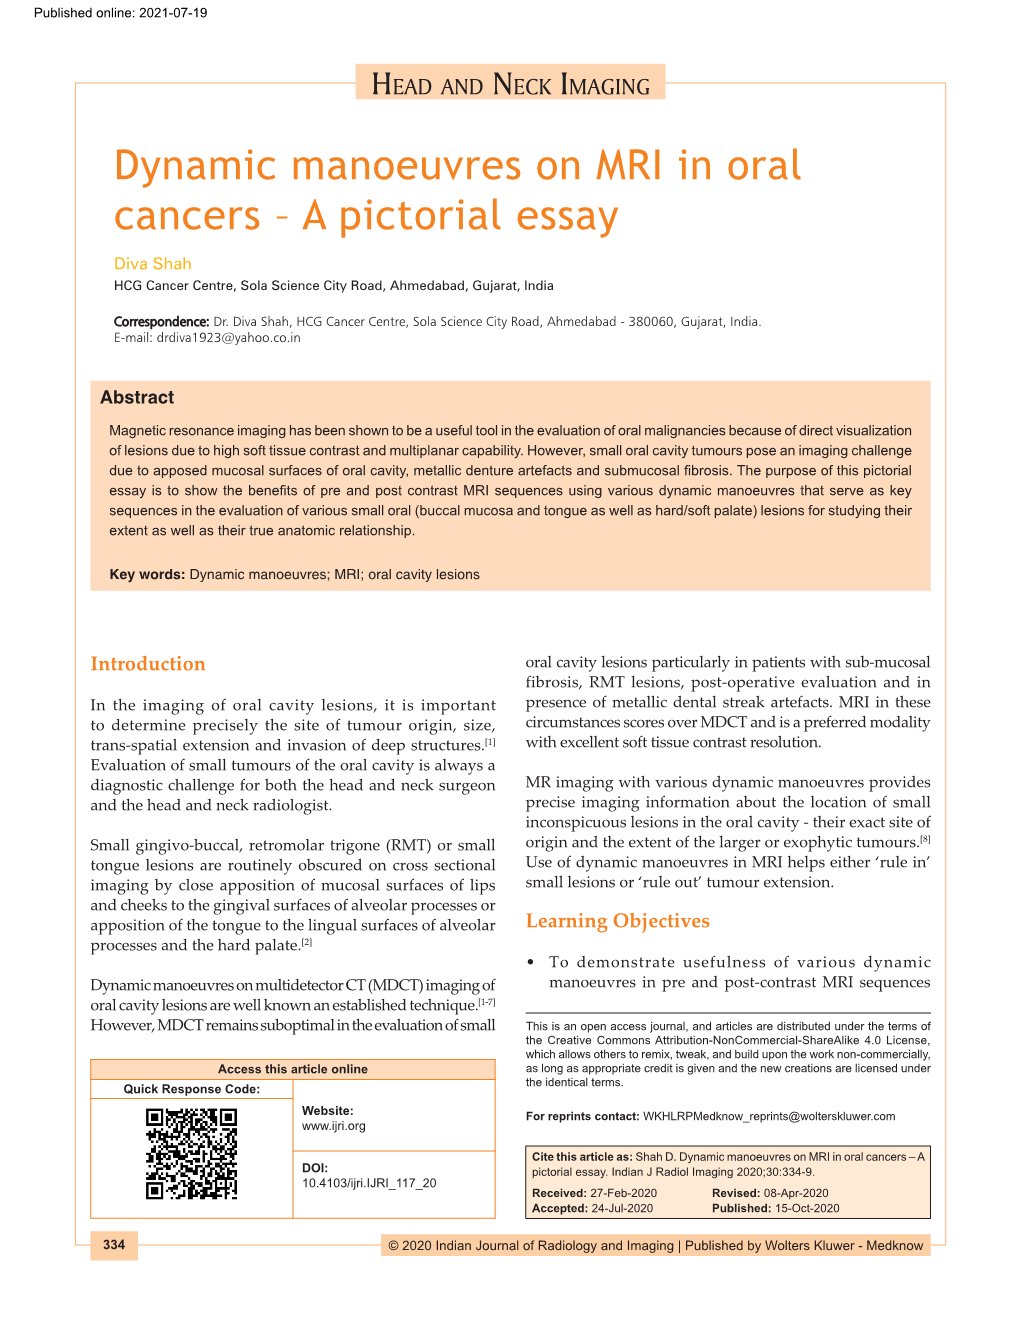 Dynamic Manoeuvres on MRI in Oral Cancers – a Pictorial Essay Diva Shah HCG Cancer Centre, Sola Science City Road, Ahmedabad, Gujarat, India